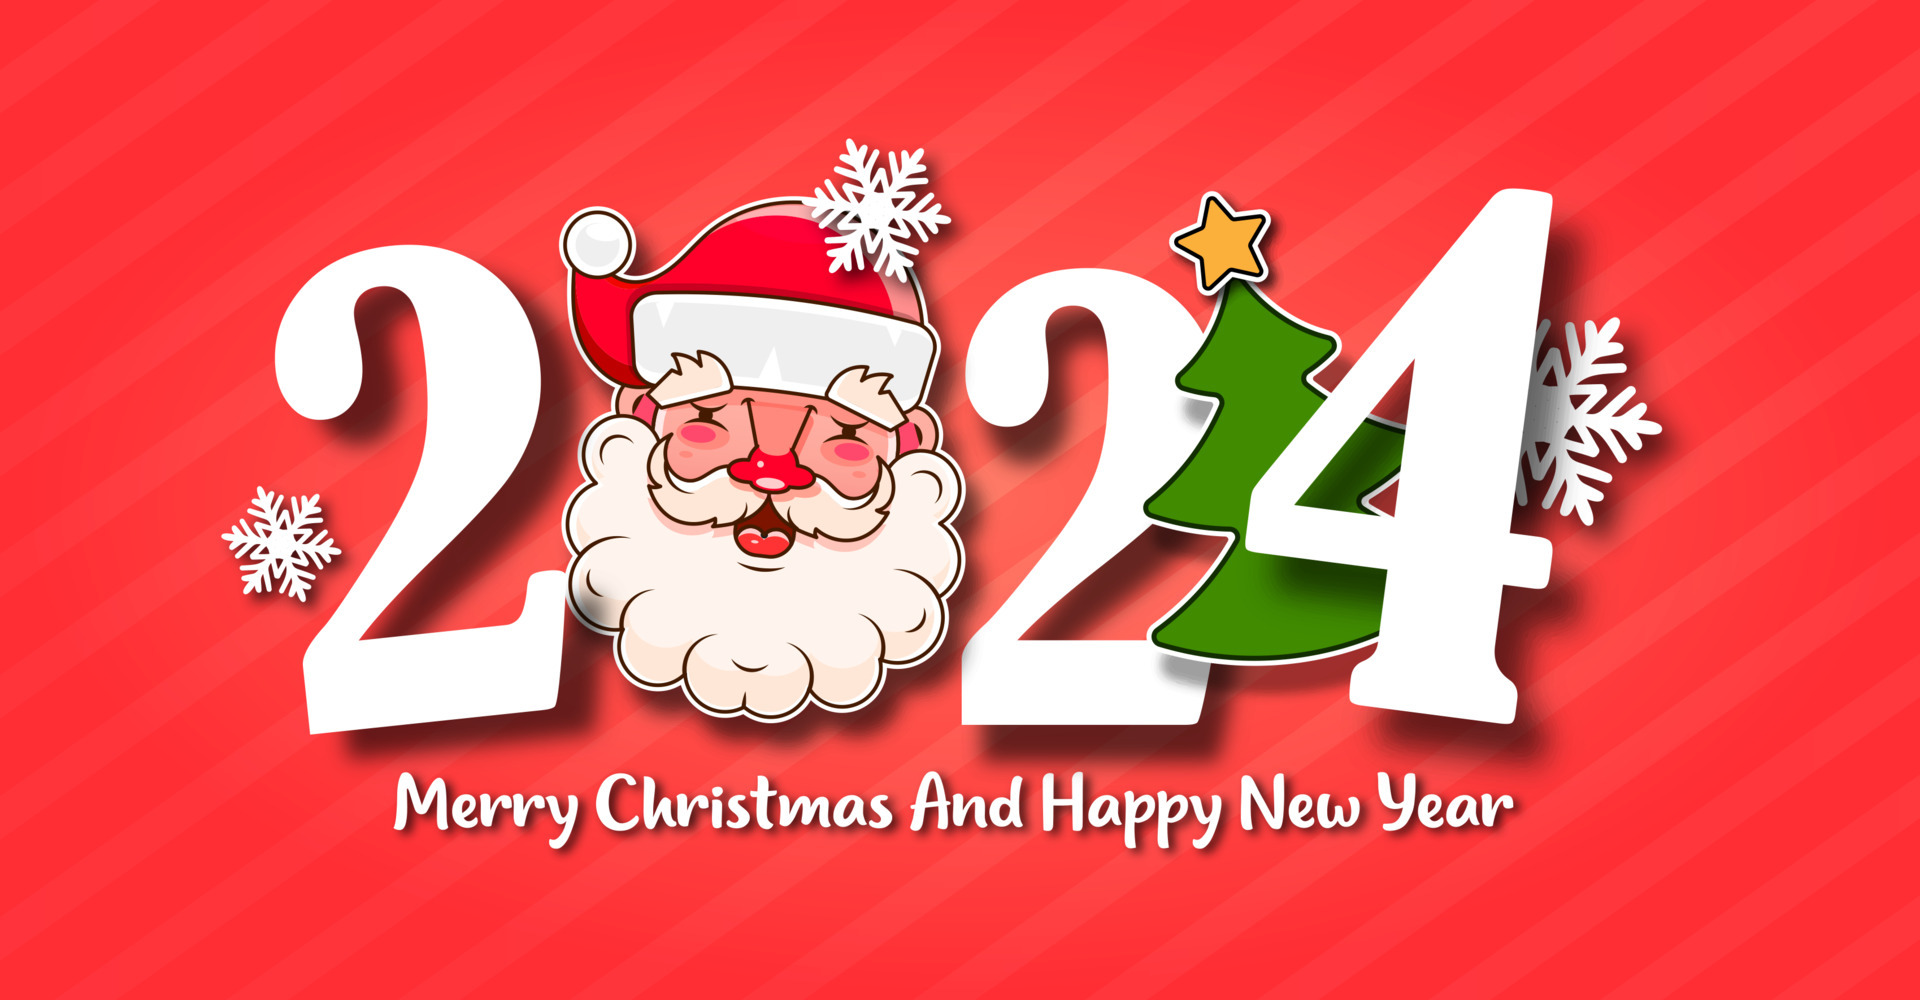 I Wish You A Merry Christmas And Happy New Year Vintage Background With